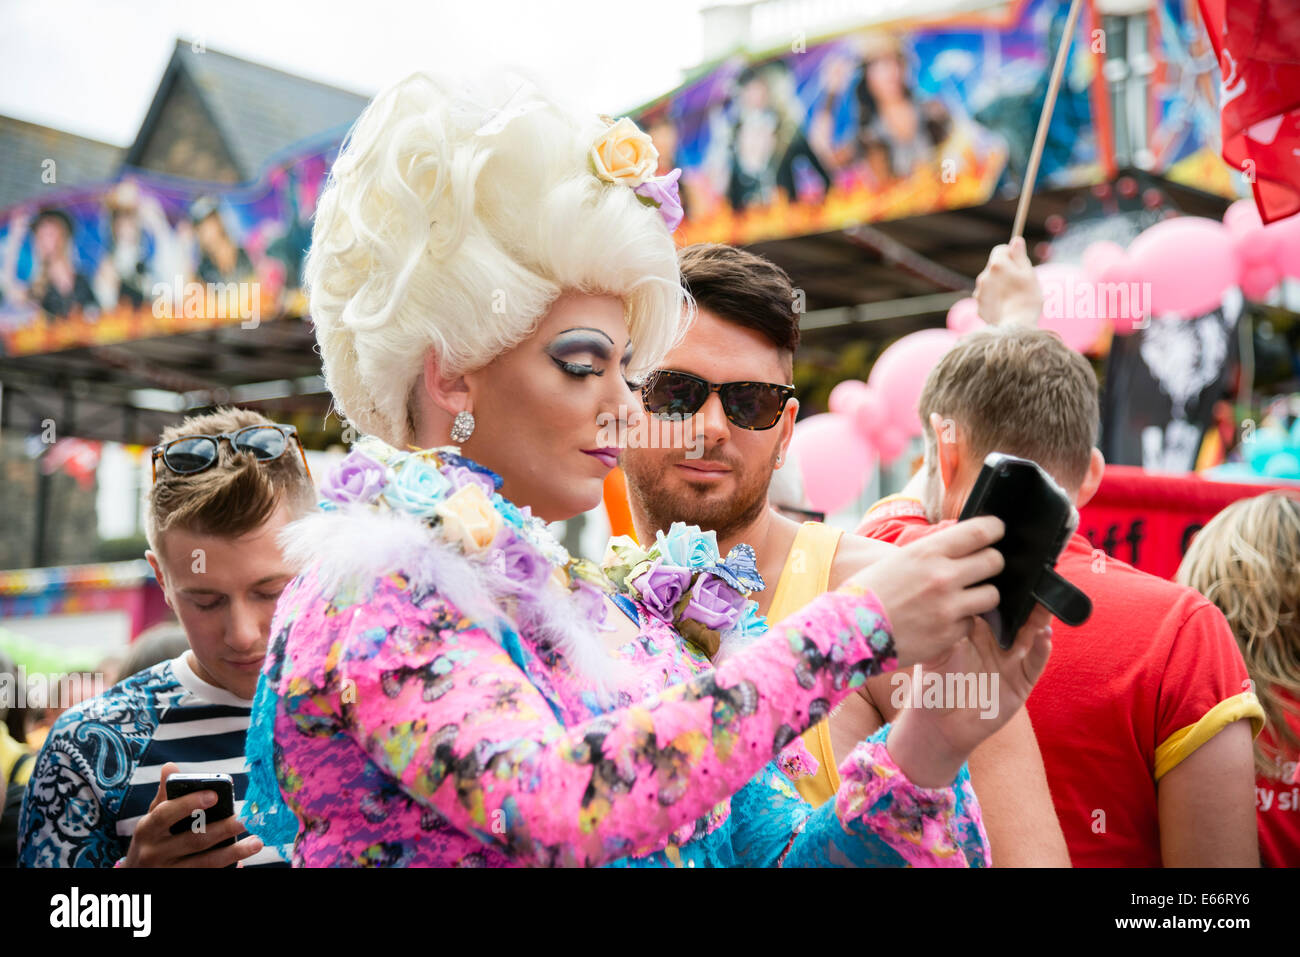 Cardiff, Wales, UK. 16. August 2014. Die 2014 stolz Cymru LGBT parade Karneval in Cardiff Drag Queen Credit: Robert Convery/Alamy Live News Stockfoto